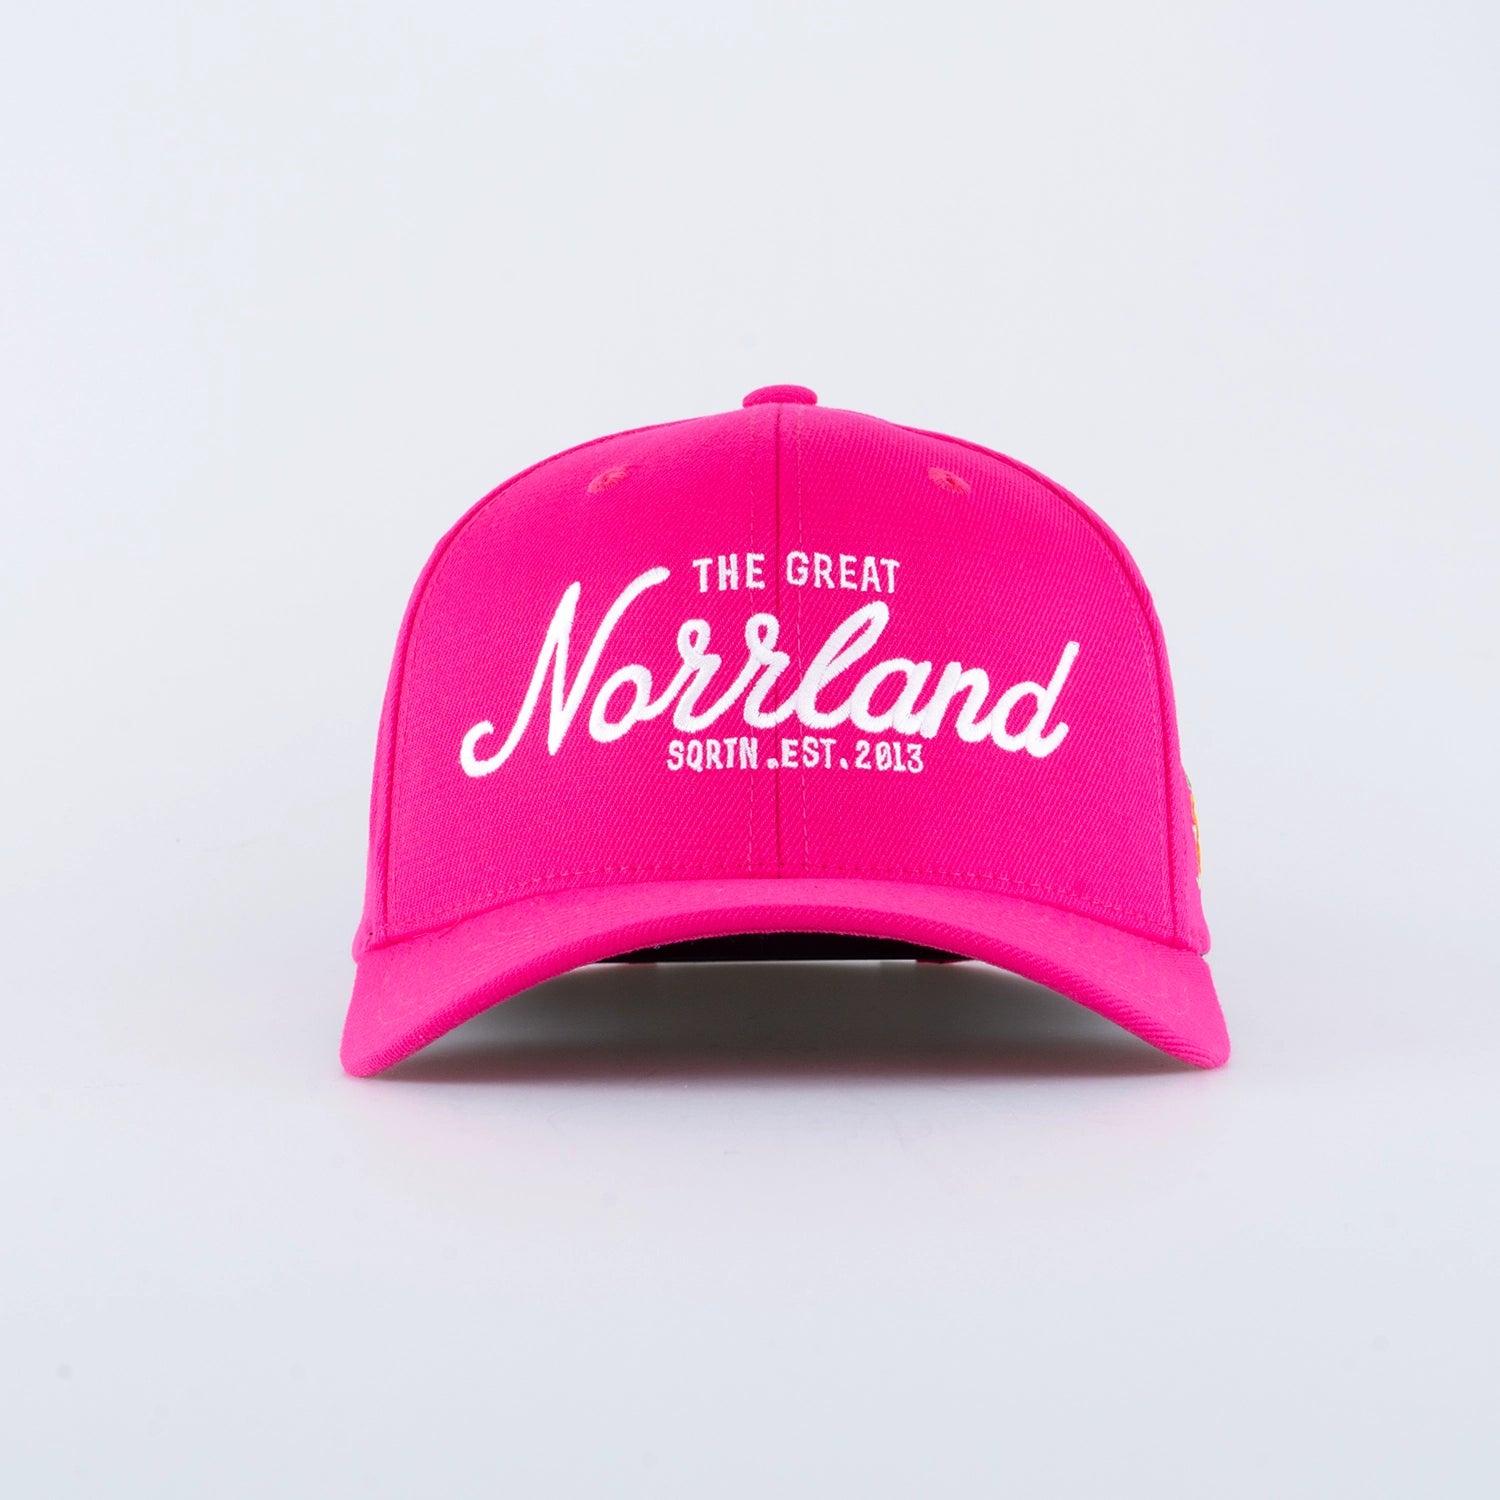 GREAT NORRLAND 120 KEPS - HOT PINK